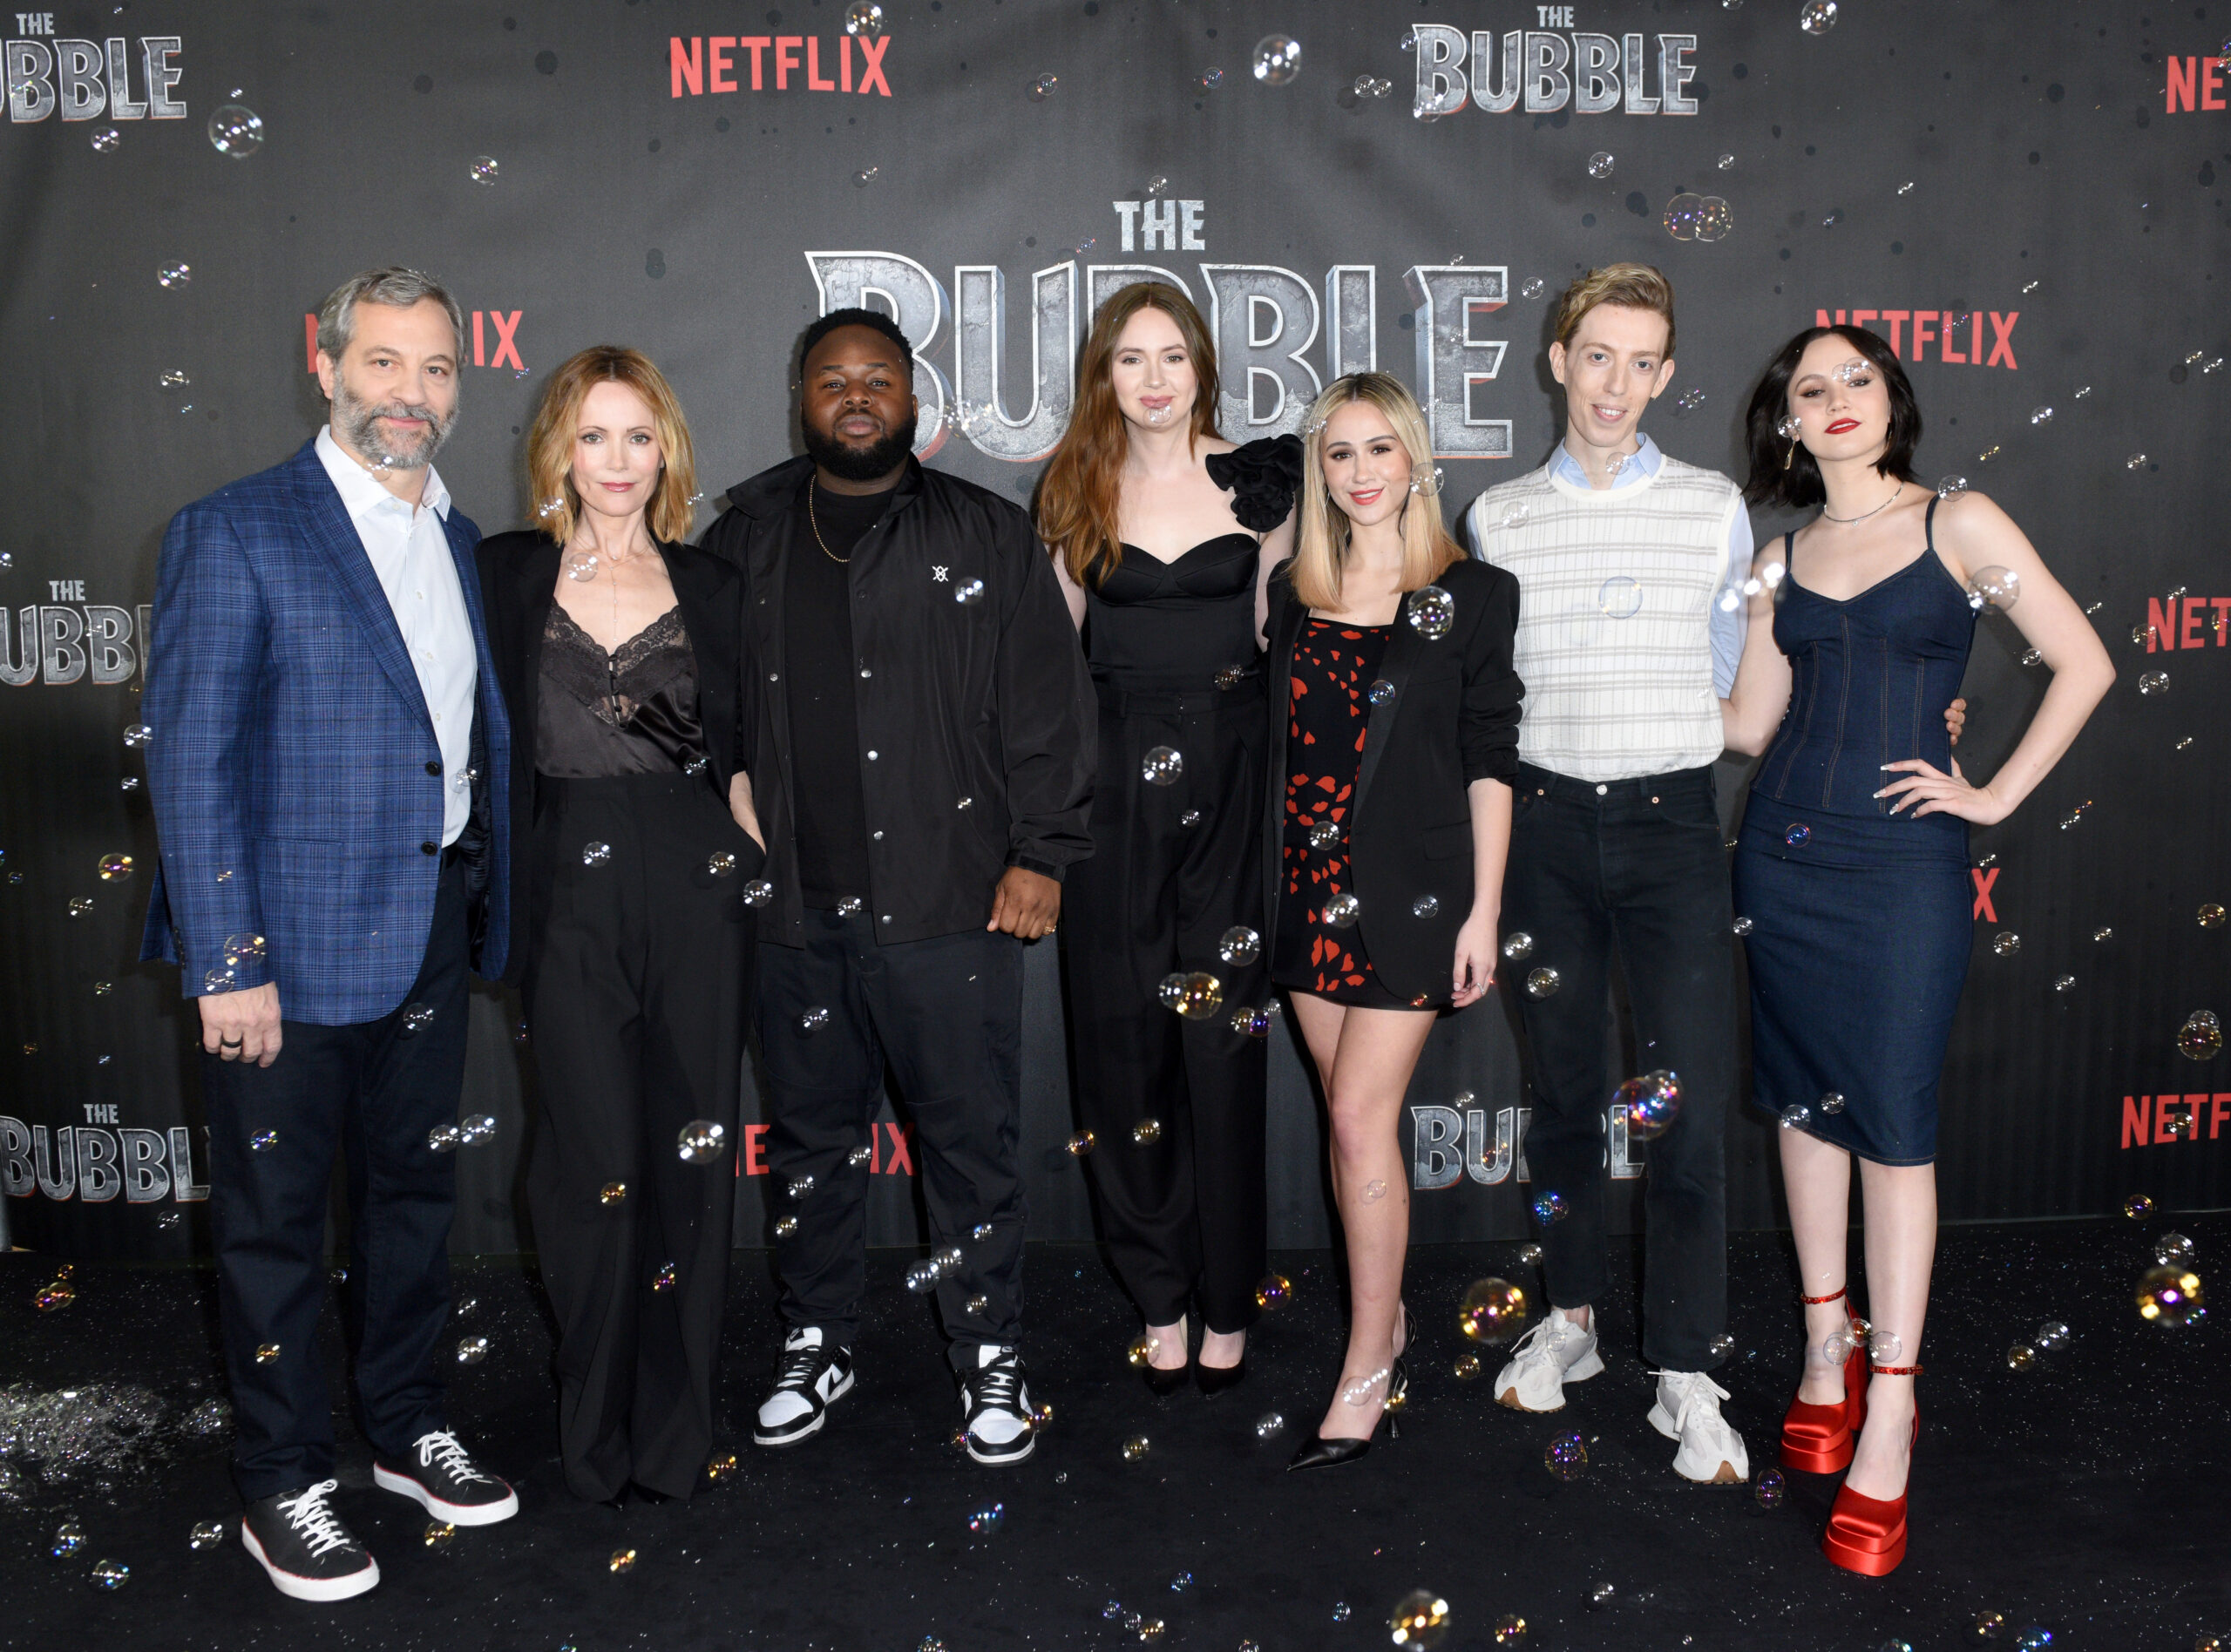 Karen Gillian, Judd Apatow, Iris Apatow, & More Attend “The Bubble